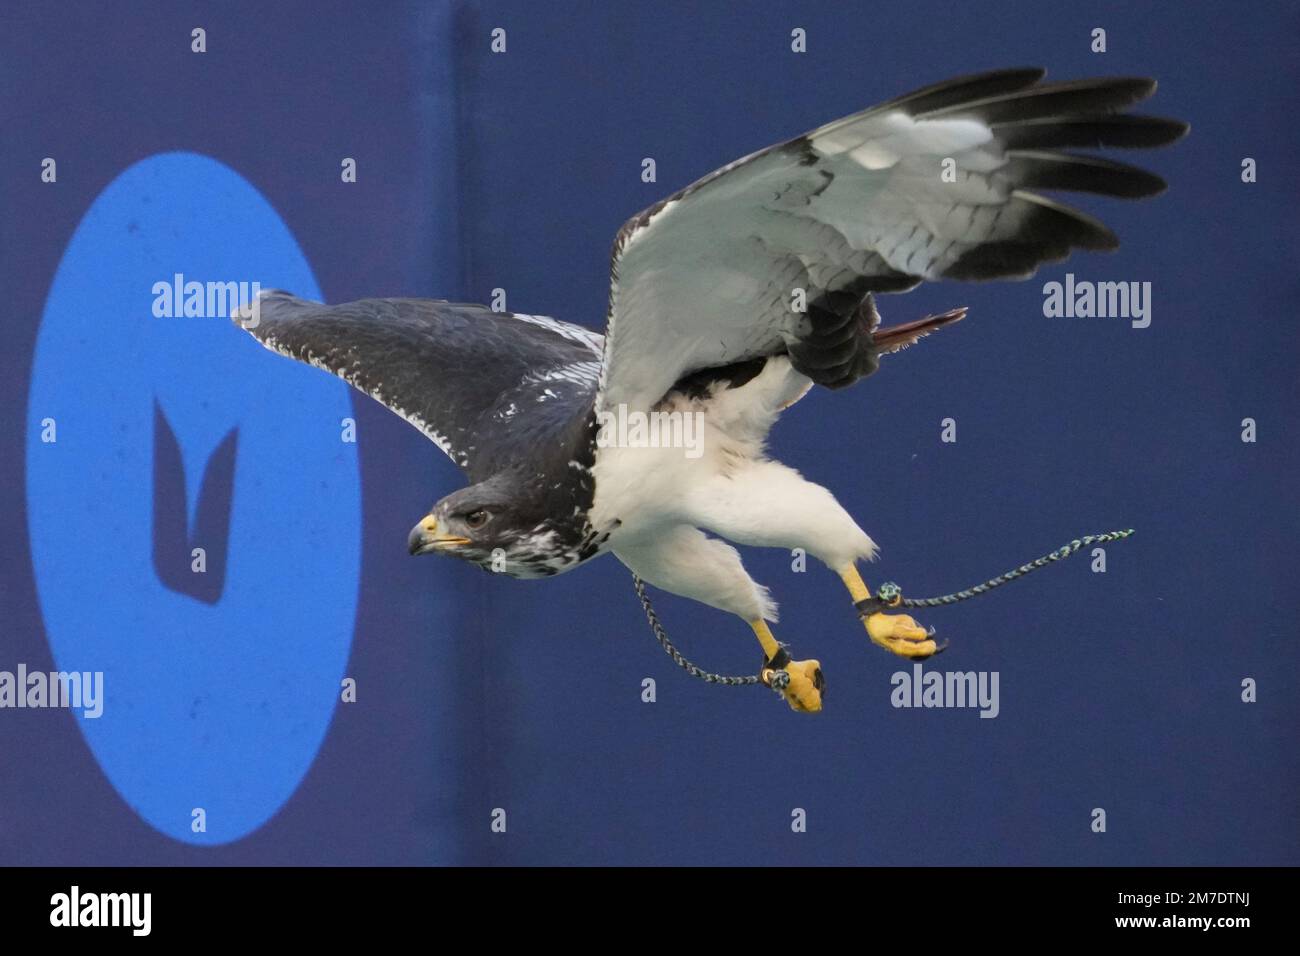 Taima, an Auger hawk that is the Seattle Seahawks live mascot, flies before an NFL football game against the New York Jets, Sunday, Jan. 1, 2023, in Seattle